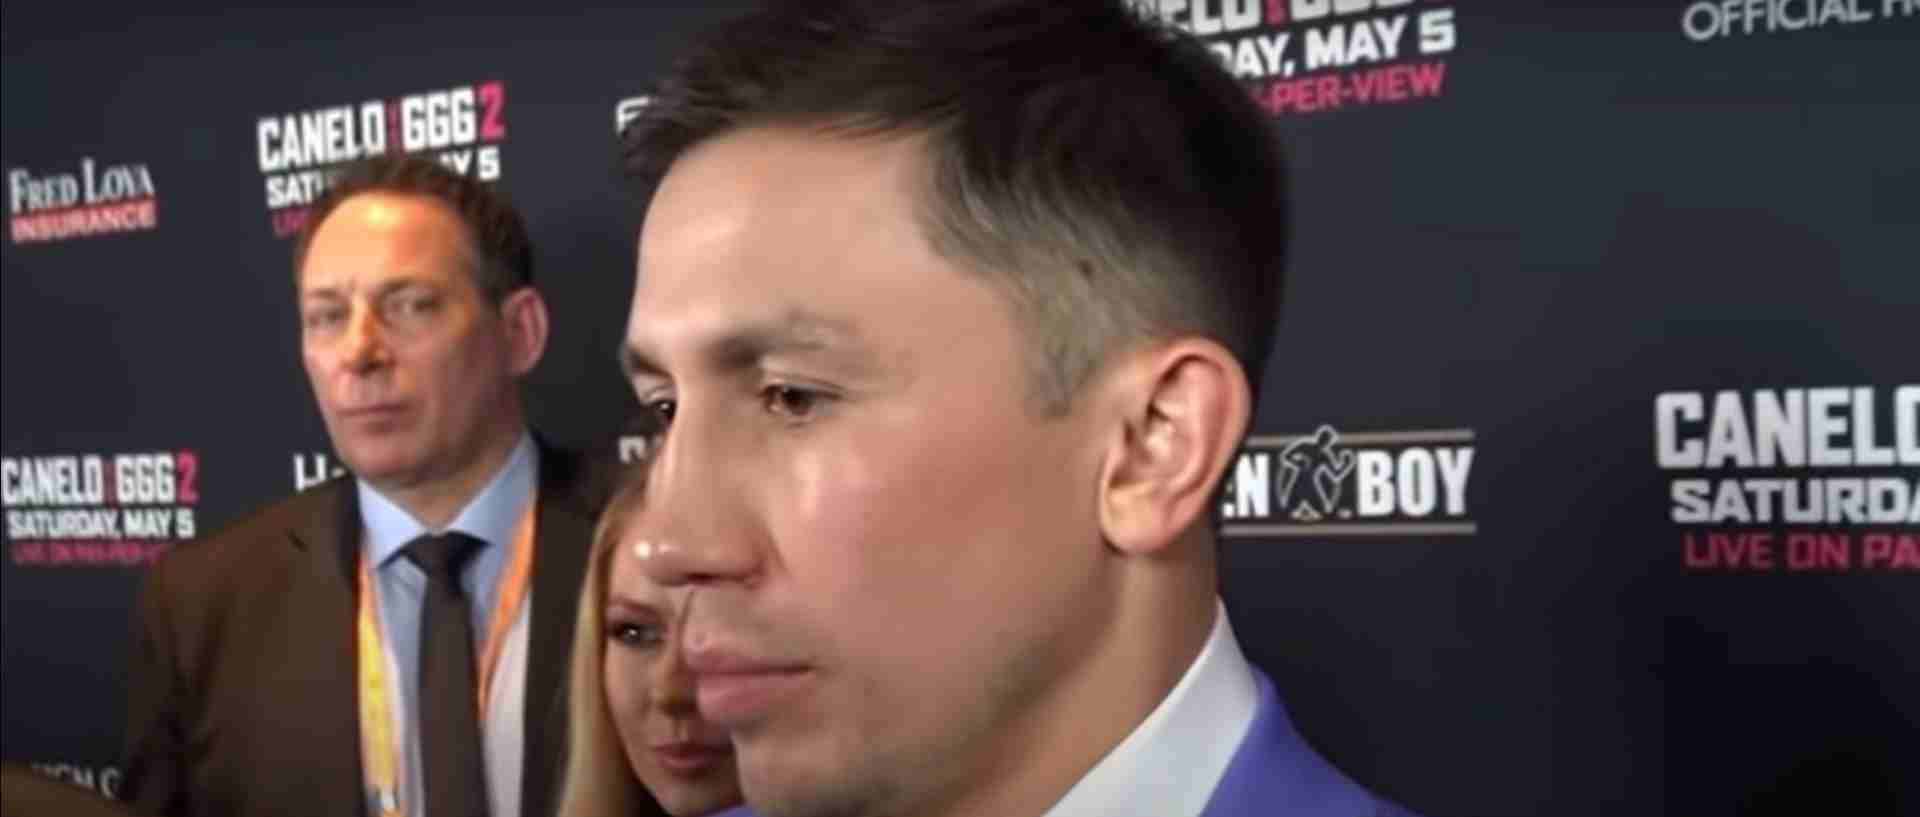 GGG's Reply When Asked On Canelo's Punching Power